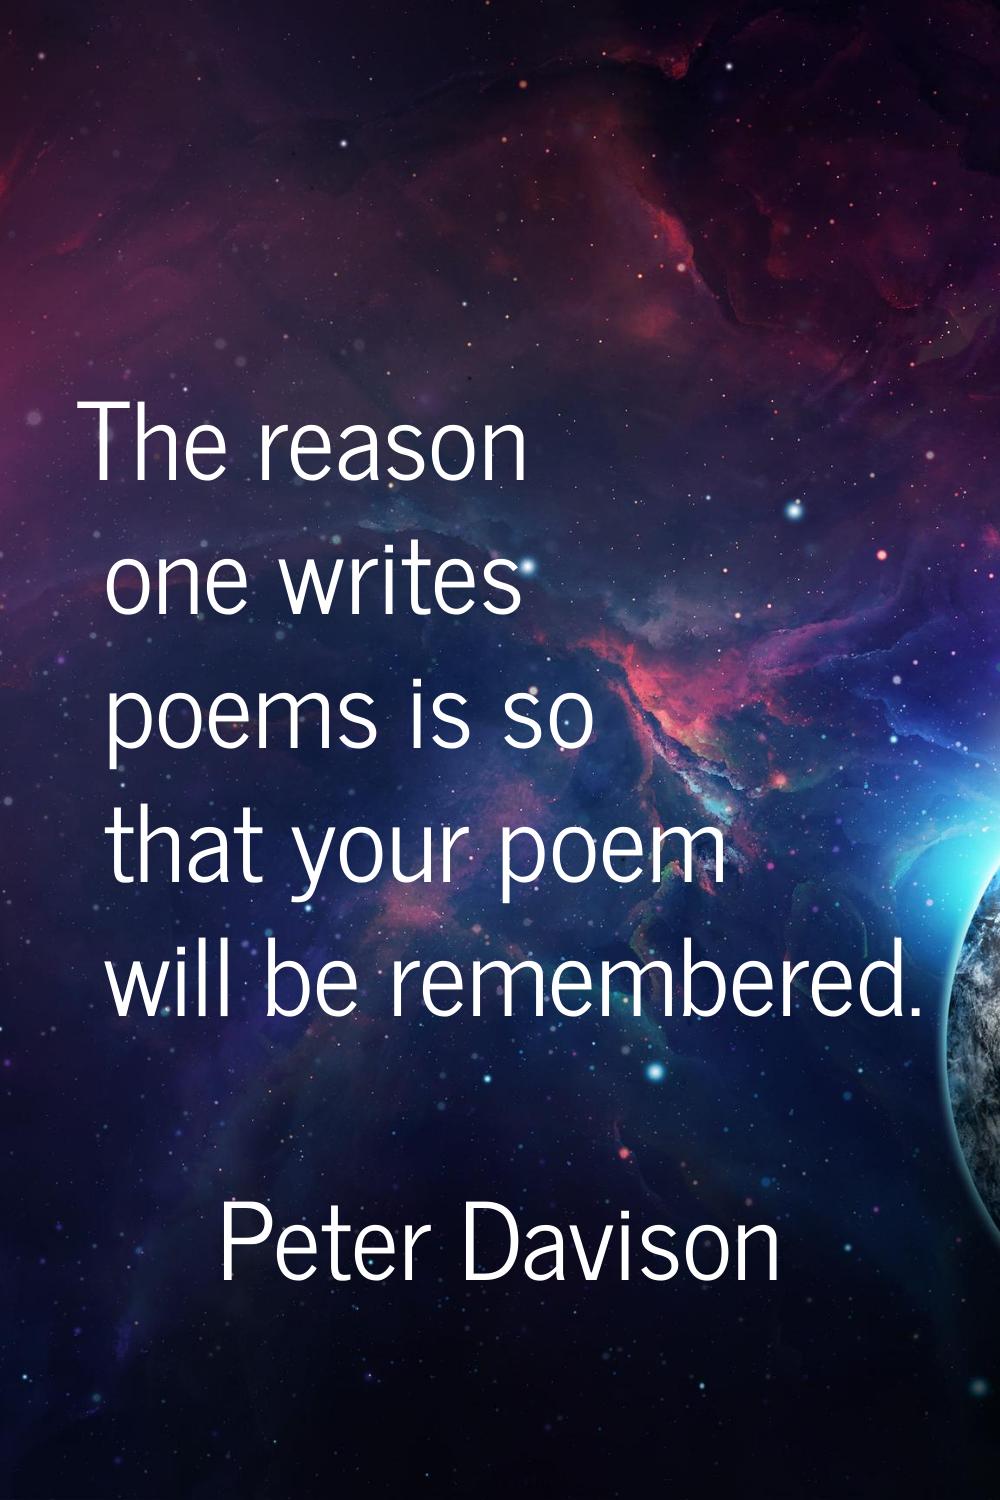 The reason one writes poems is so that your poem will be remembered.